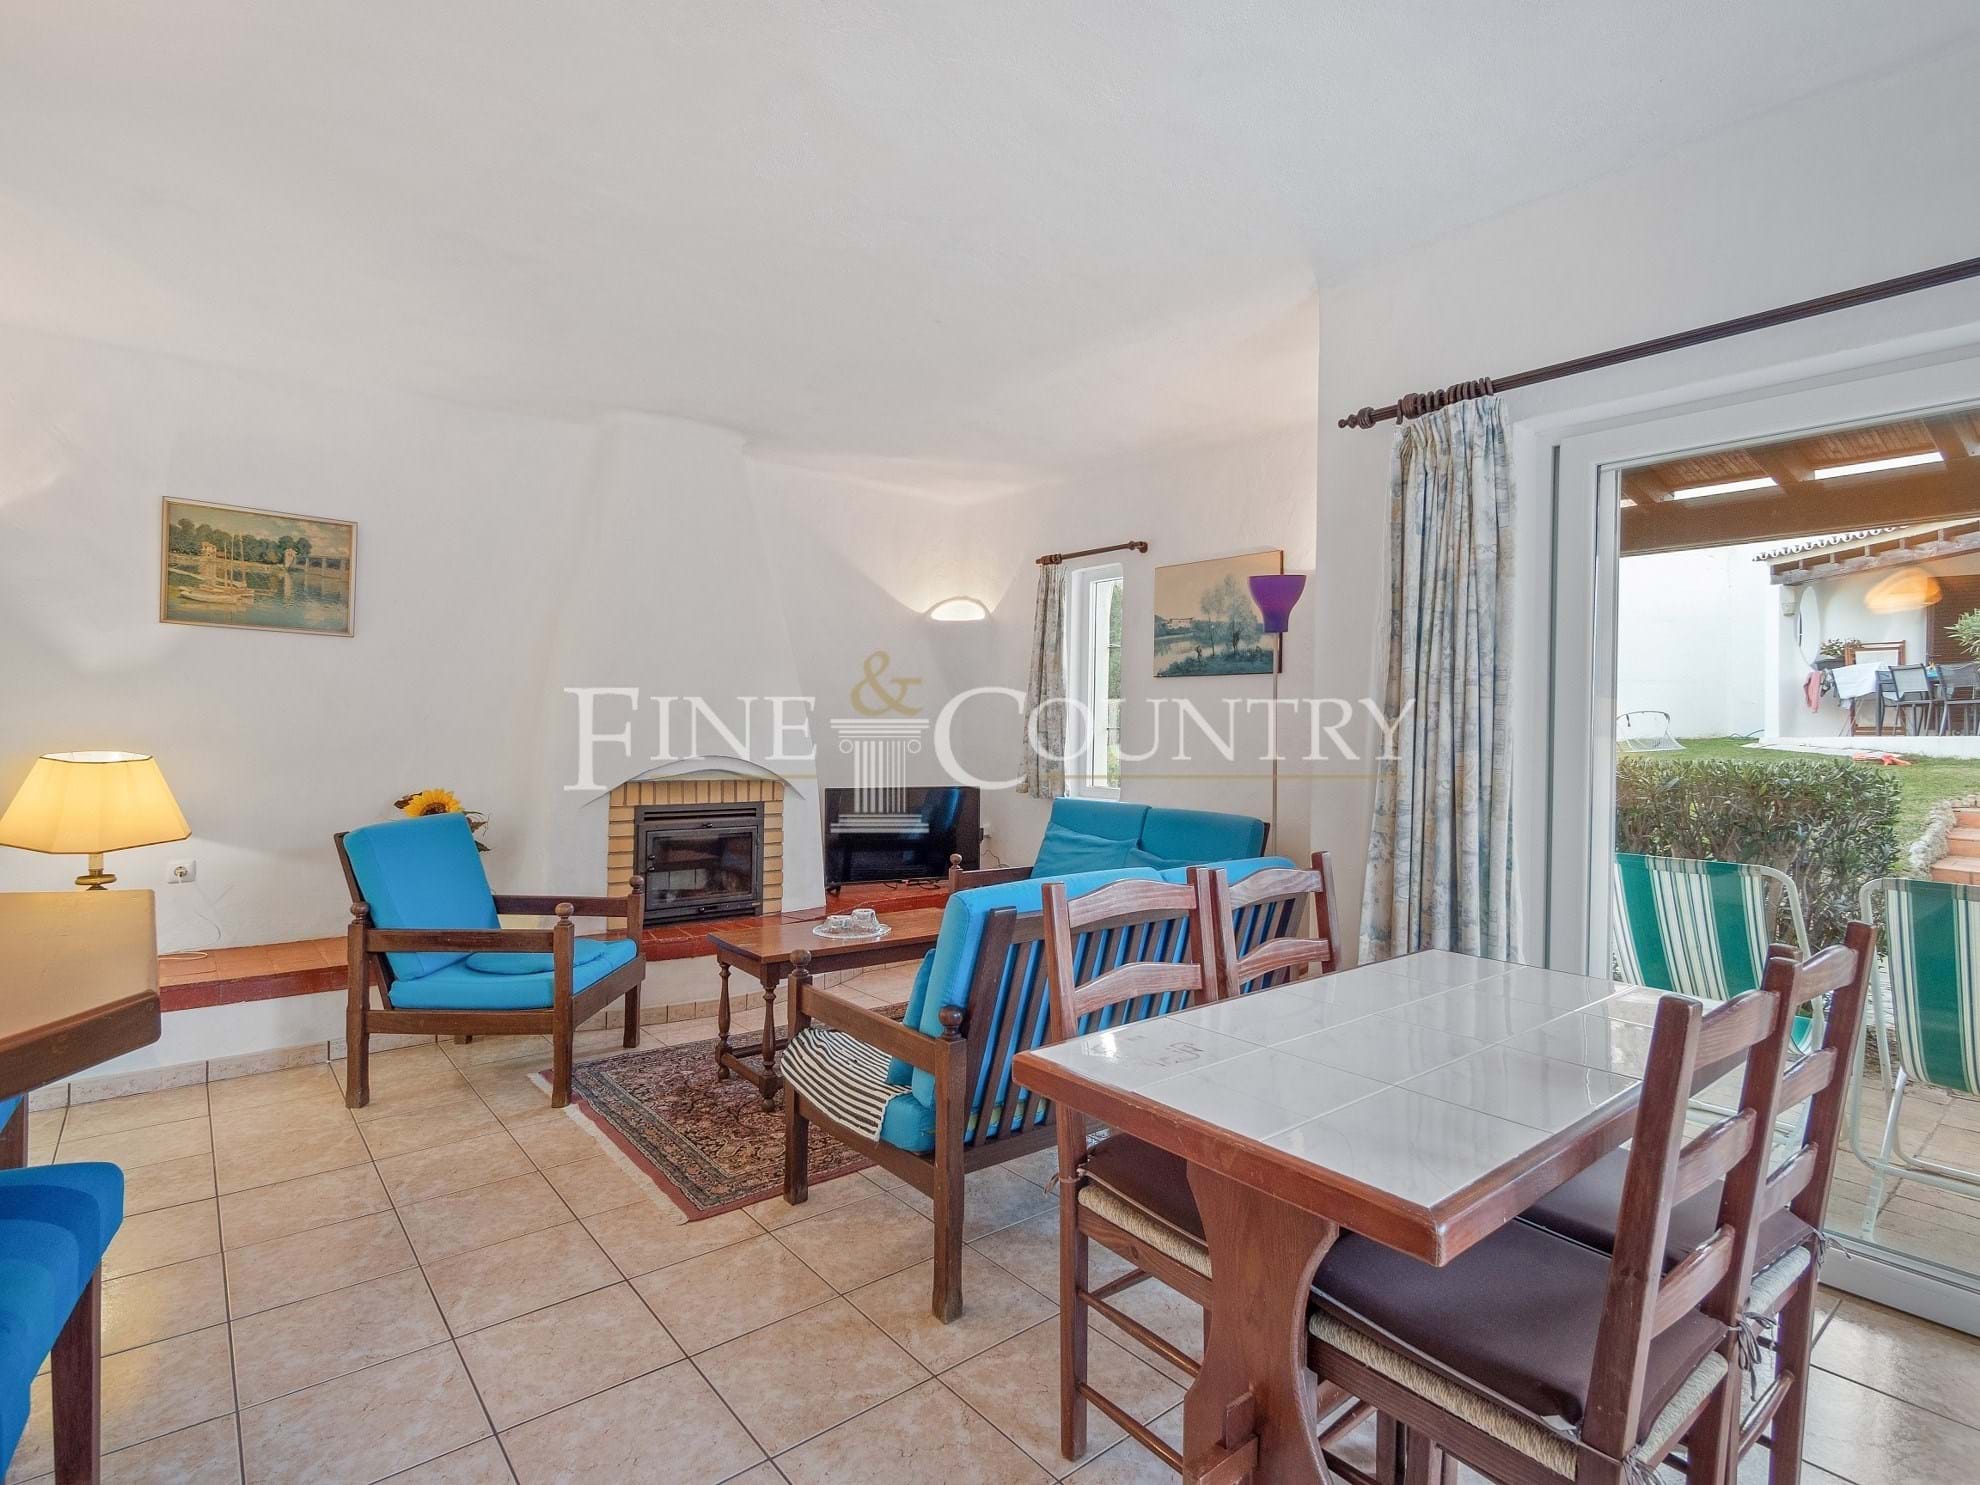 Photo of Carvoeiro - 2-bedroom single level attached property in Carvoeiro